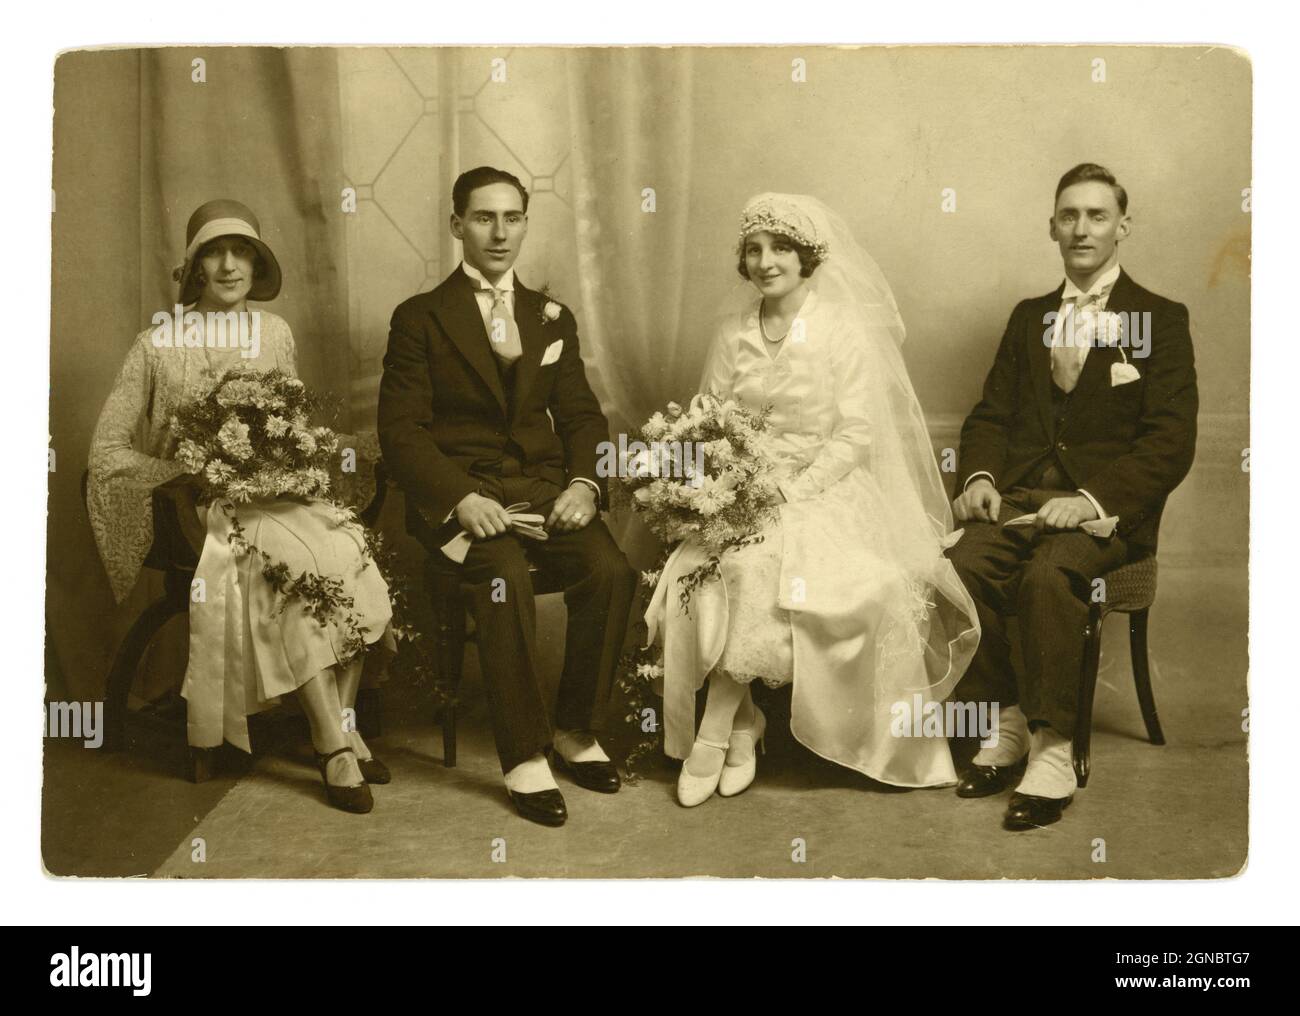 Stunning original classic 1920's, flapper era, wedding group portrait photo, beautiful bride wearing a long veil, stunning headpiece. sitting next to the groom and best man wearing matching suits with winged shirt collars, spats. The bridesmaid or maid of honour is wearing a fashionable cloche hat, circa 1924, U.K. Stock Photo